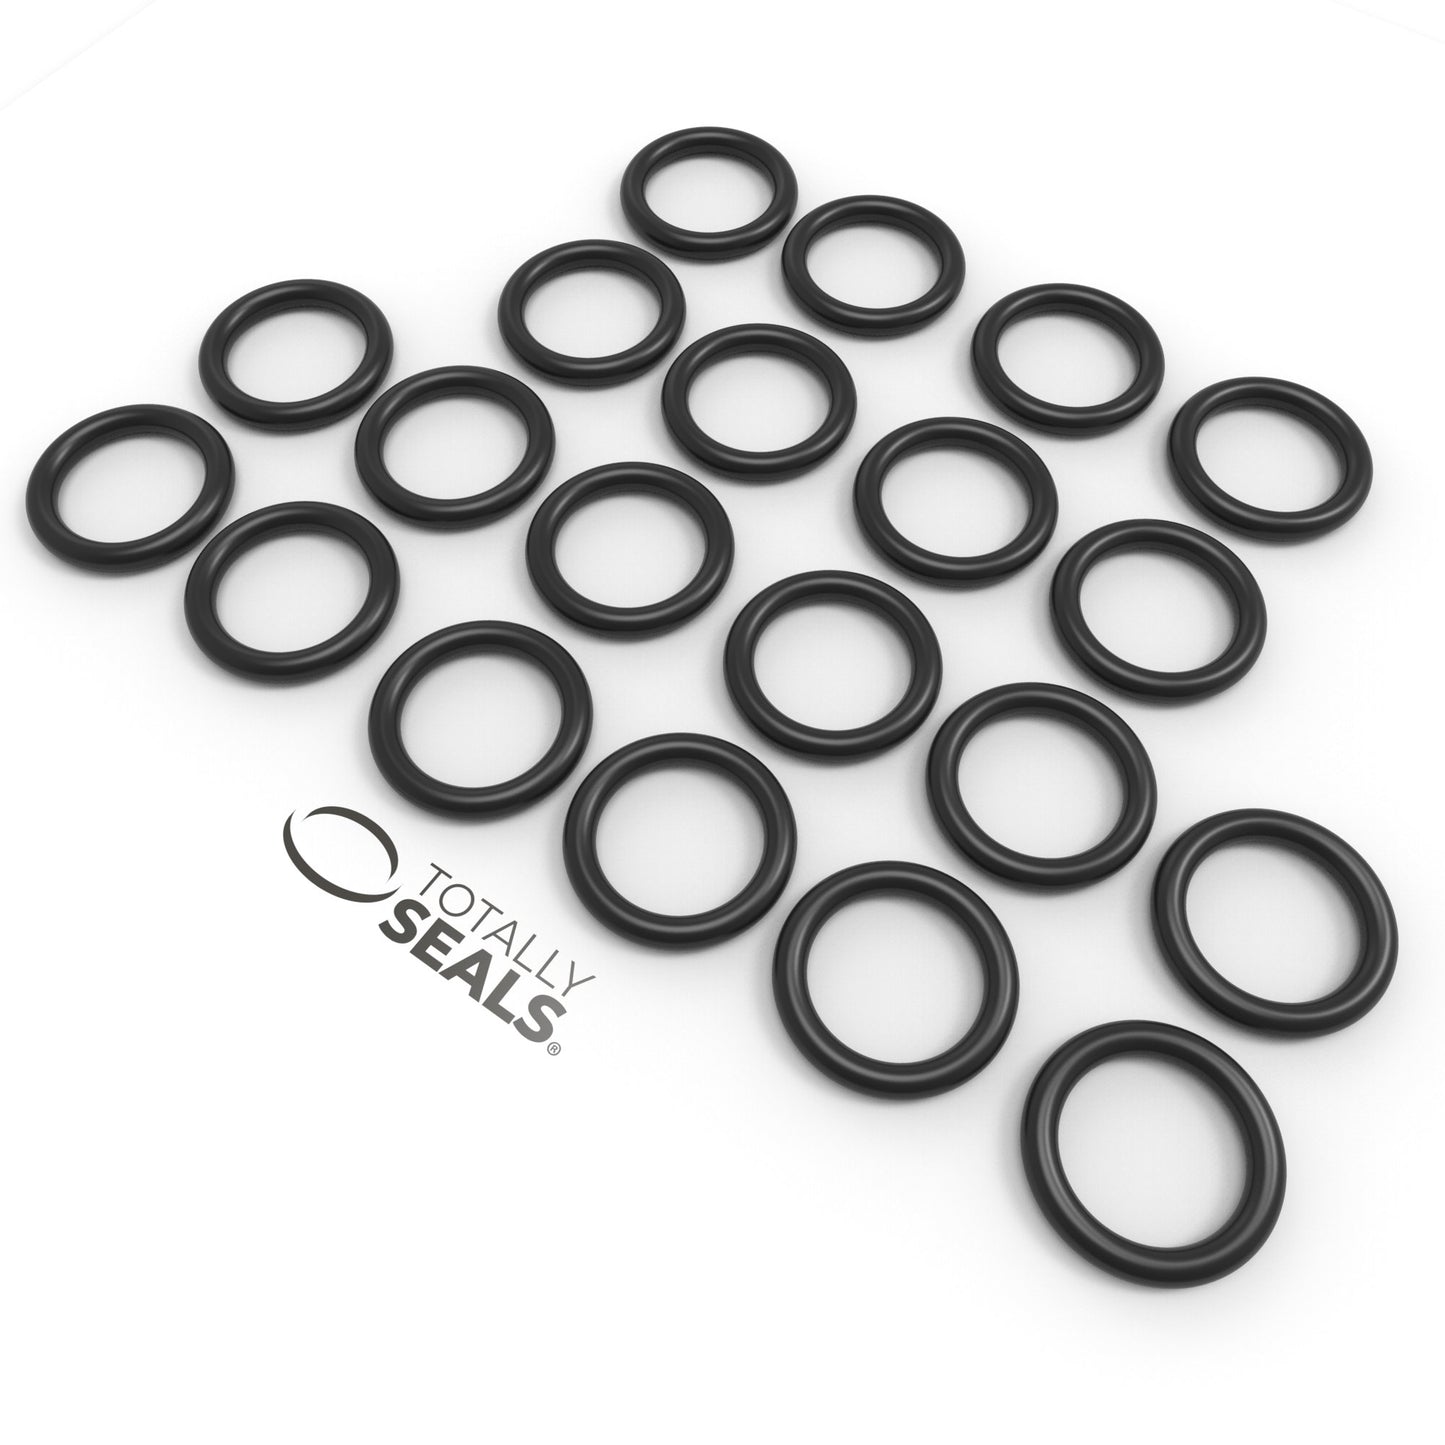 5/16" x 1/16" (BS011) Imperial Nitrile O-Rings - Totally Seals®